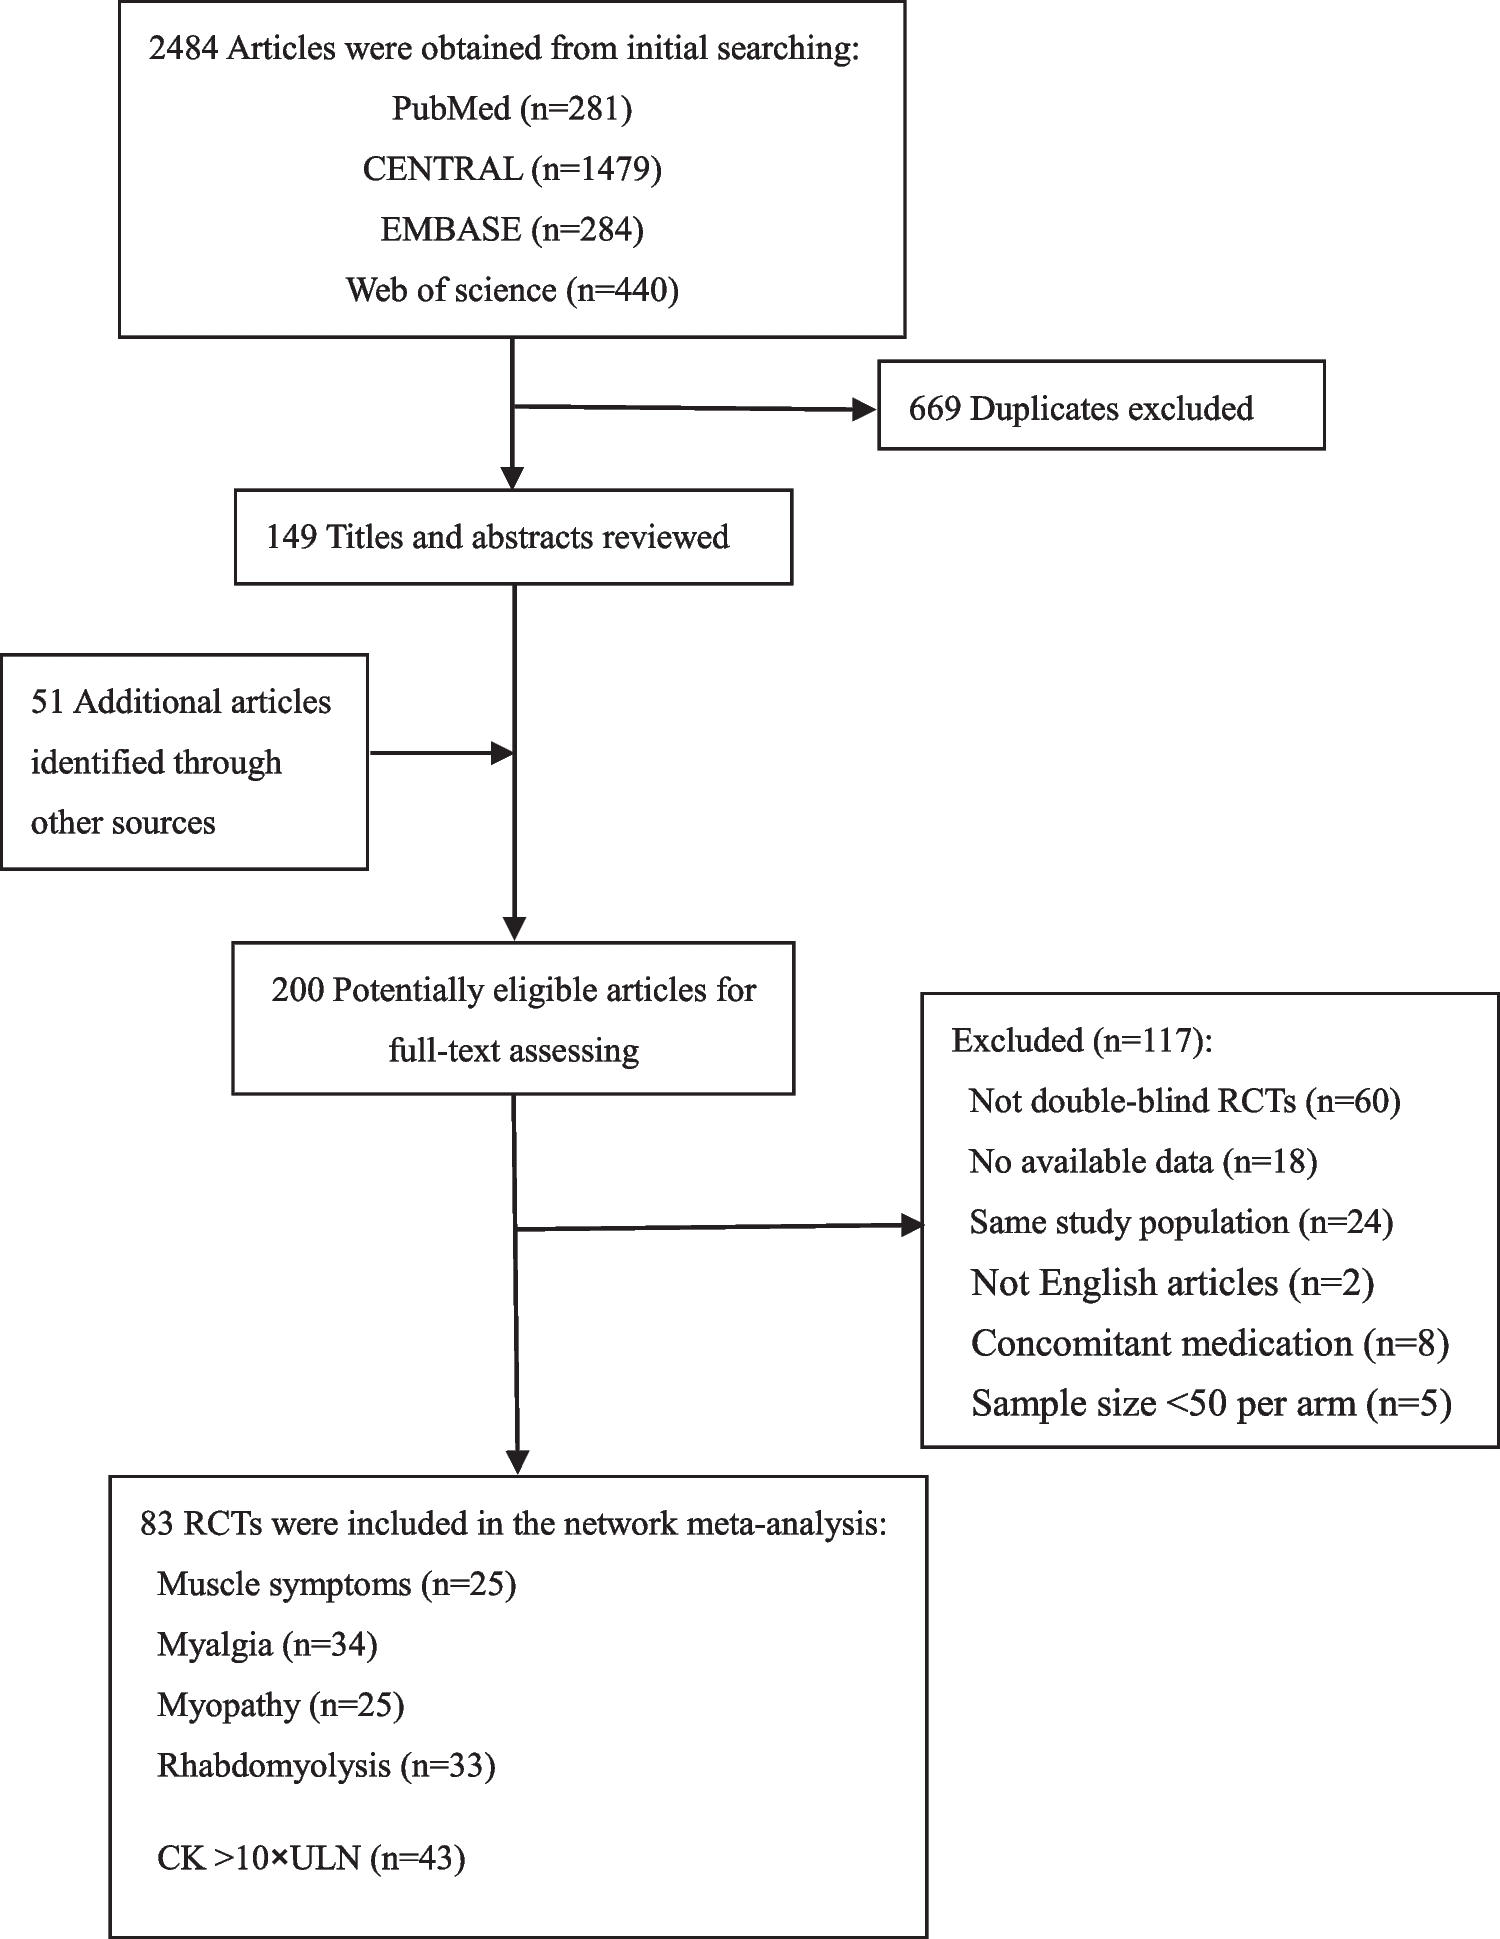 Comparative Muscle Tolerability of Different Types and Intensities of Statins: A Network Meta-Analysis of Double-Blind Randomized Controlled Trials